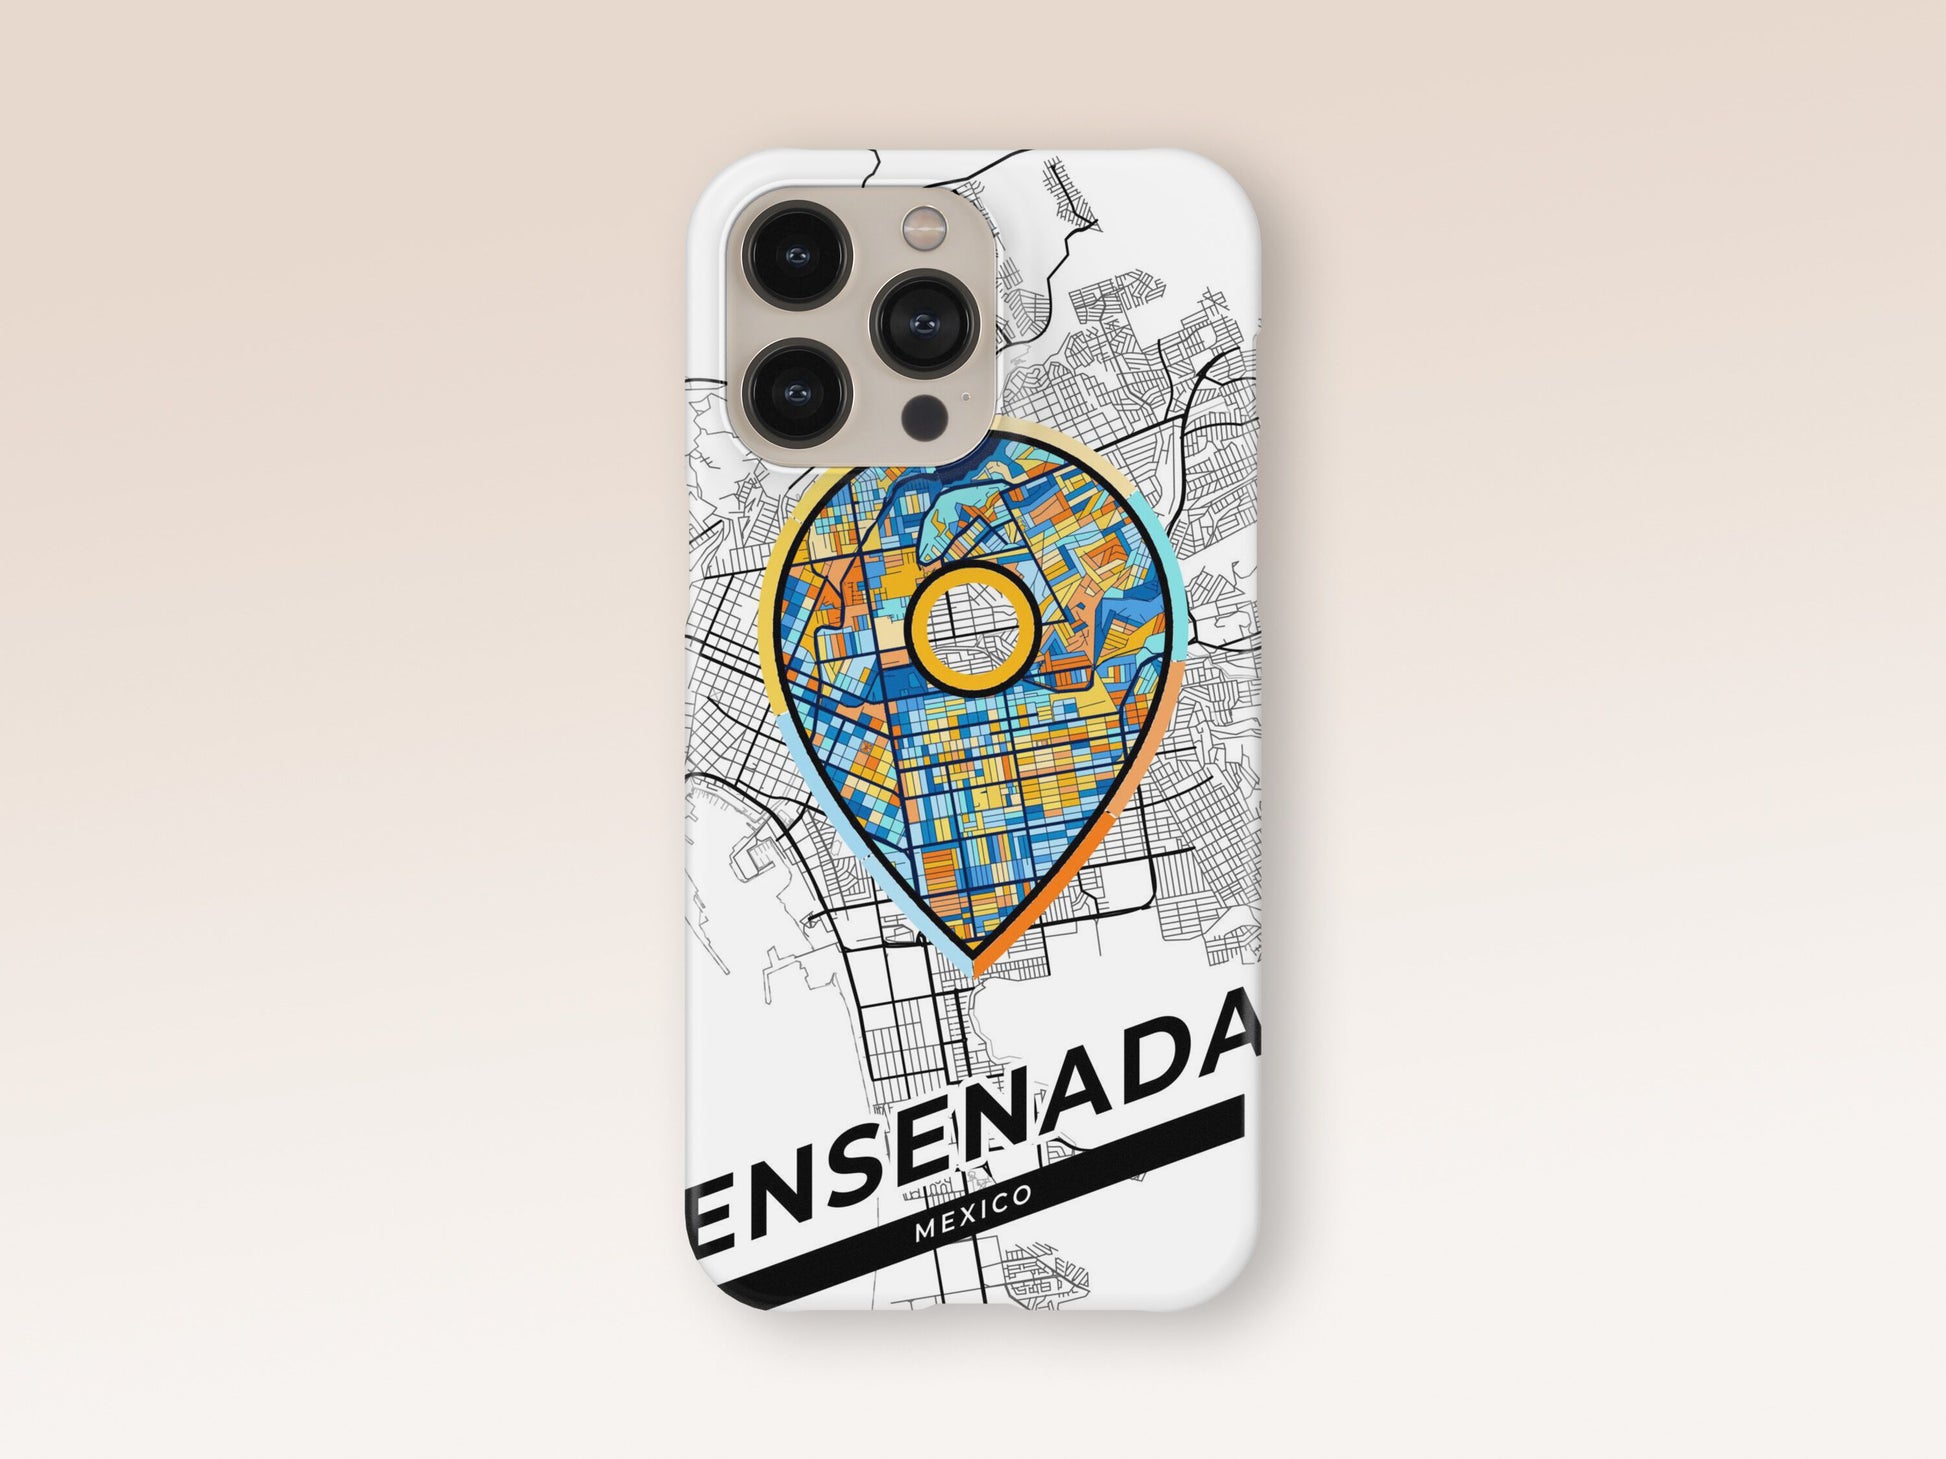 Ensenada Mexico slim phone case with colorful icon. Birthday, wedding or housewarming gift. Couple match cases. 1